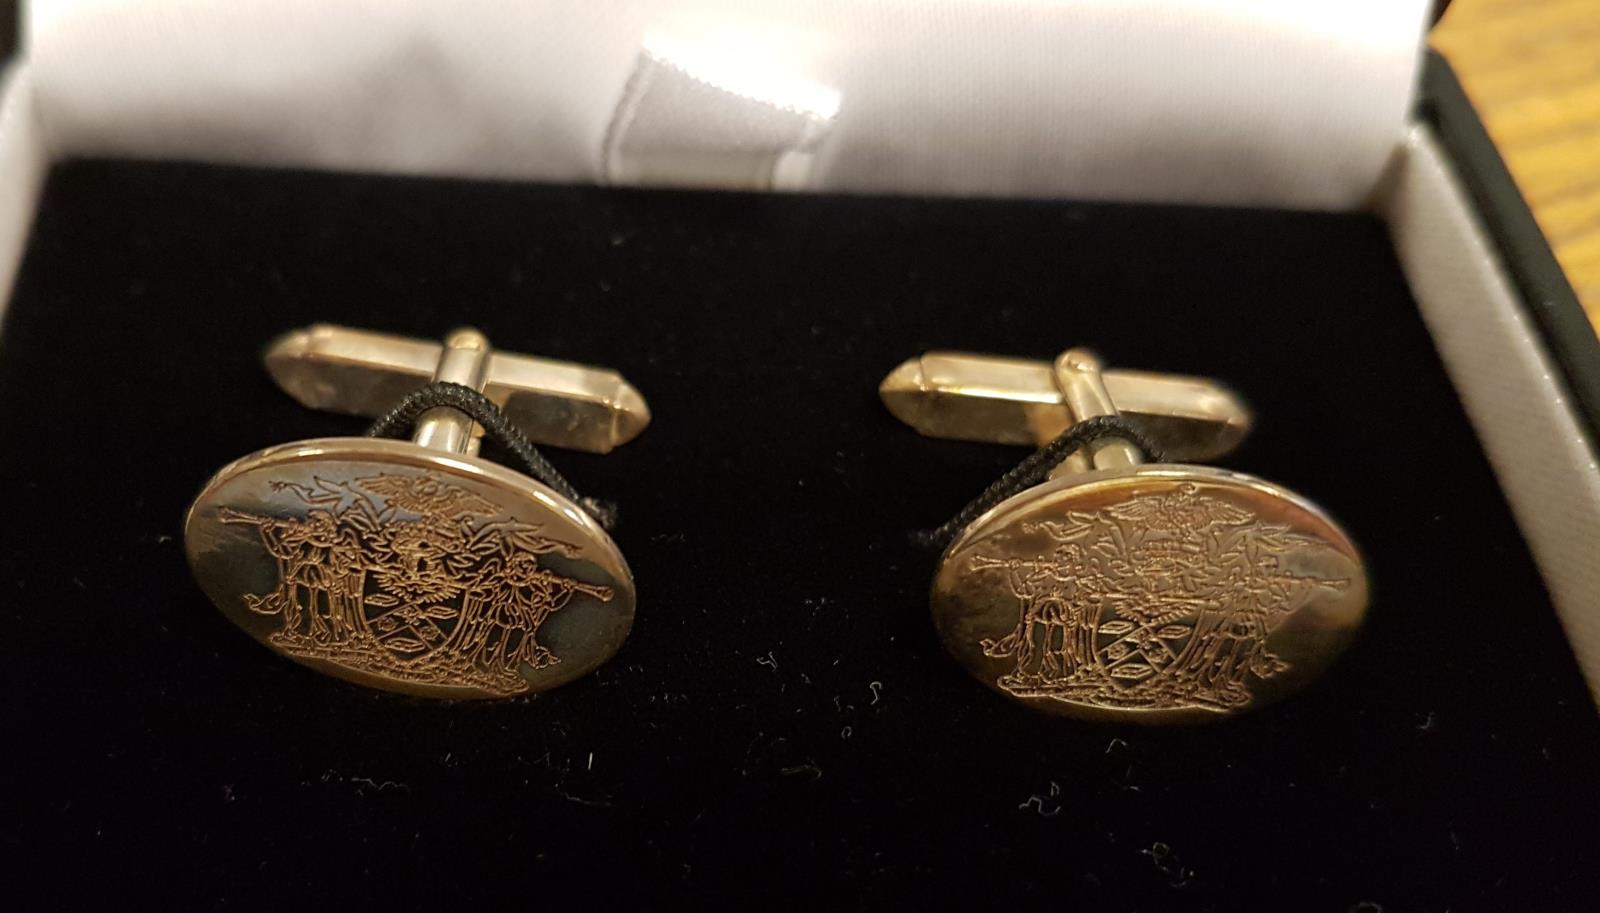 Silver Cufflinks Swivel Bolt Fastening, oval in shape with Stationers’ Company Crest